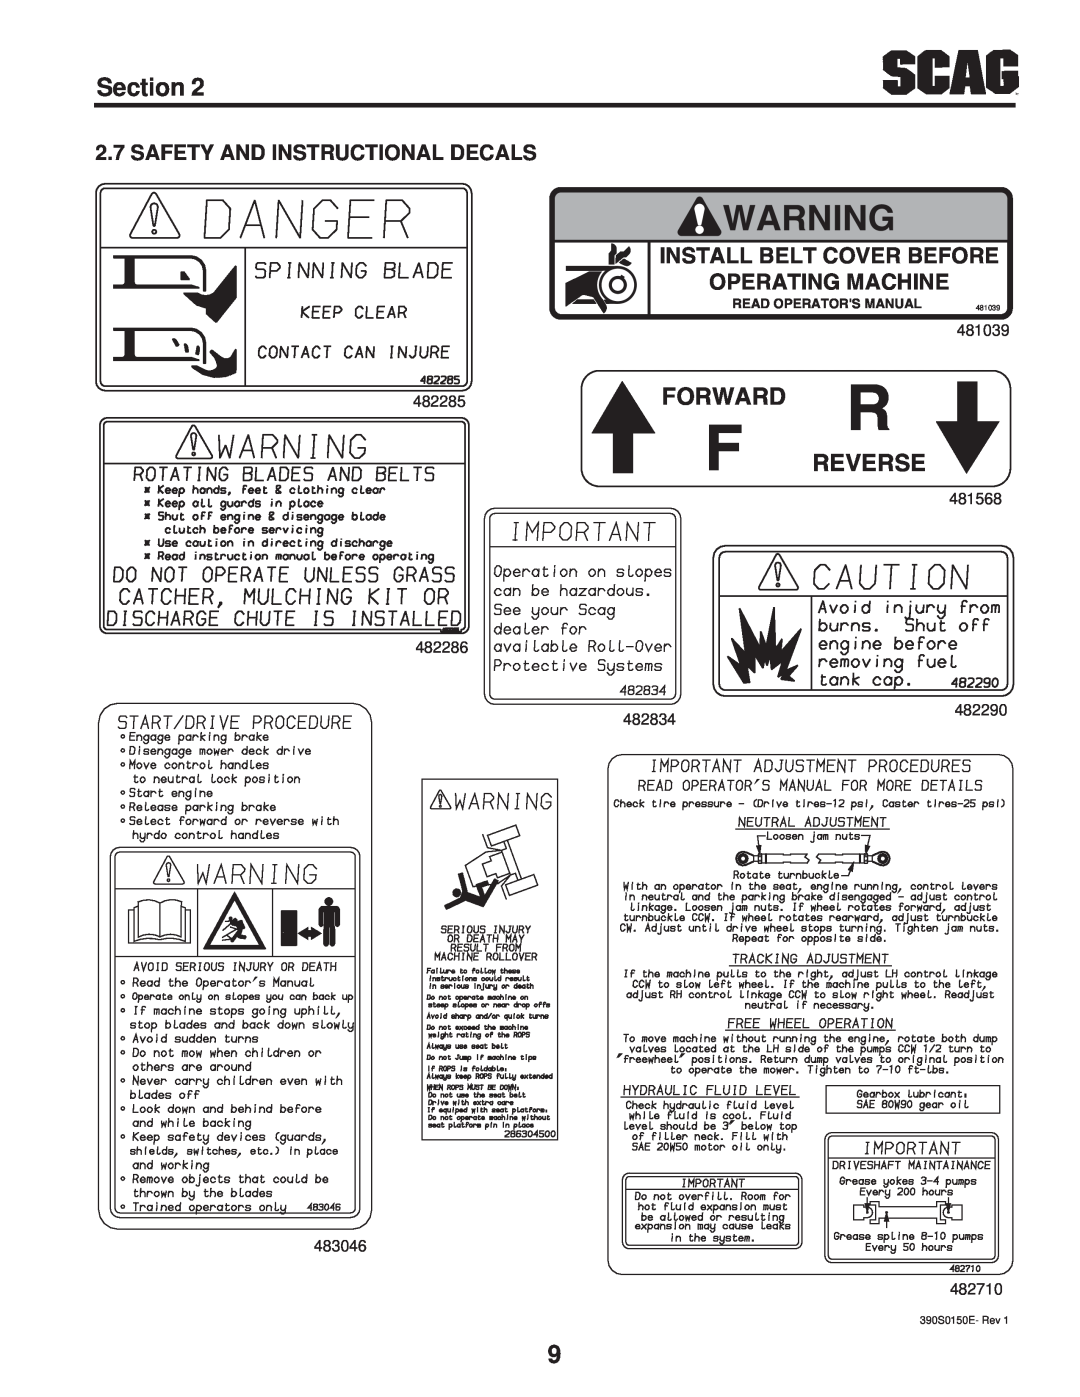 Scag Power Equipment STT-31BSD manual Safety And Instructional Decals, Section, Forward R F Reverse, 482285 482286, 481039 